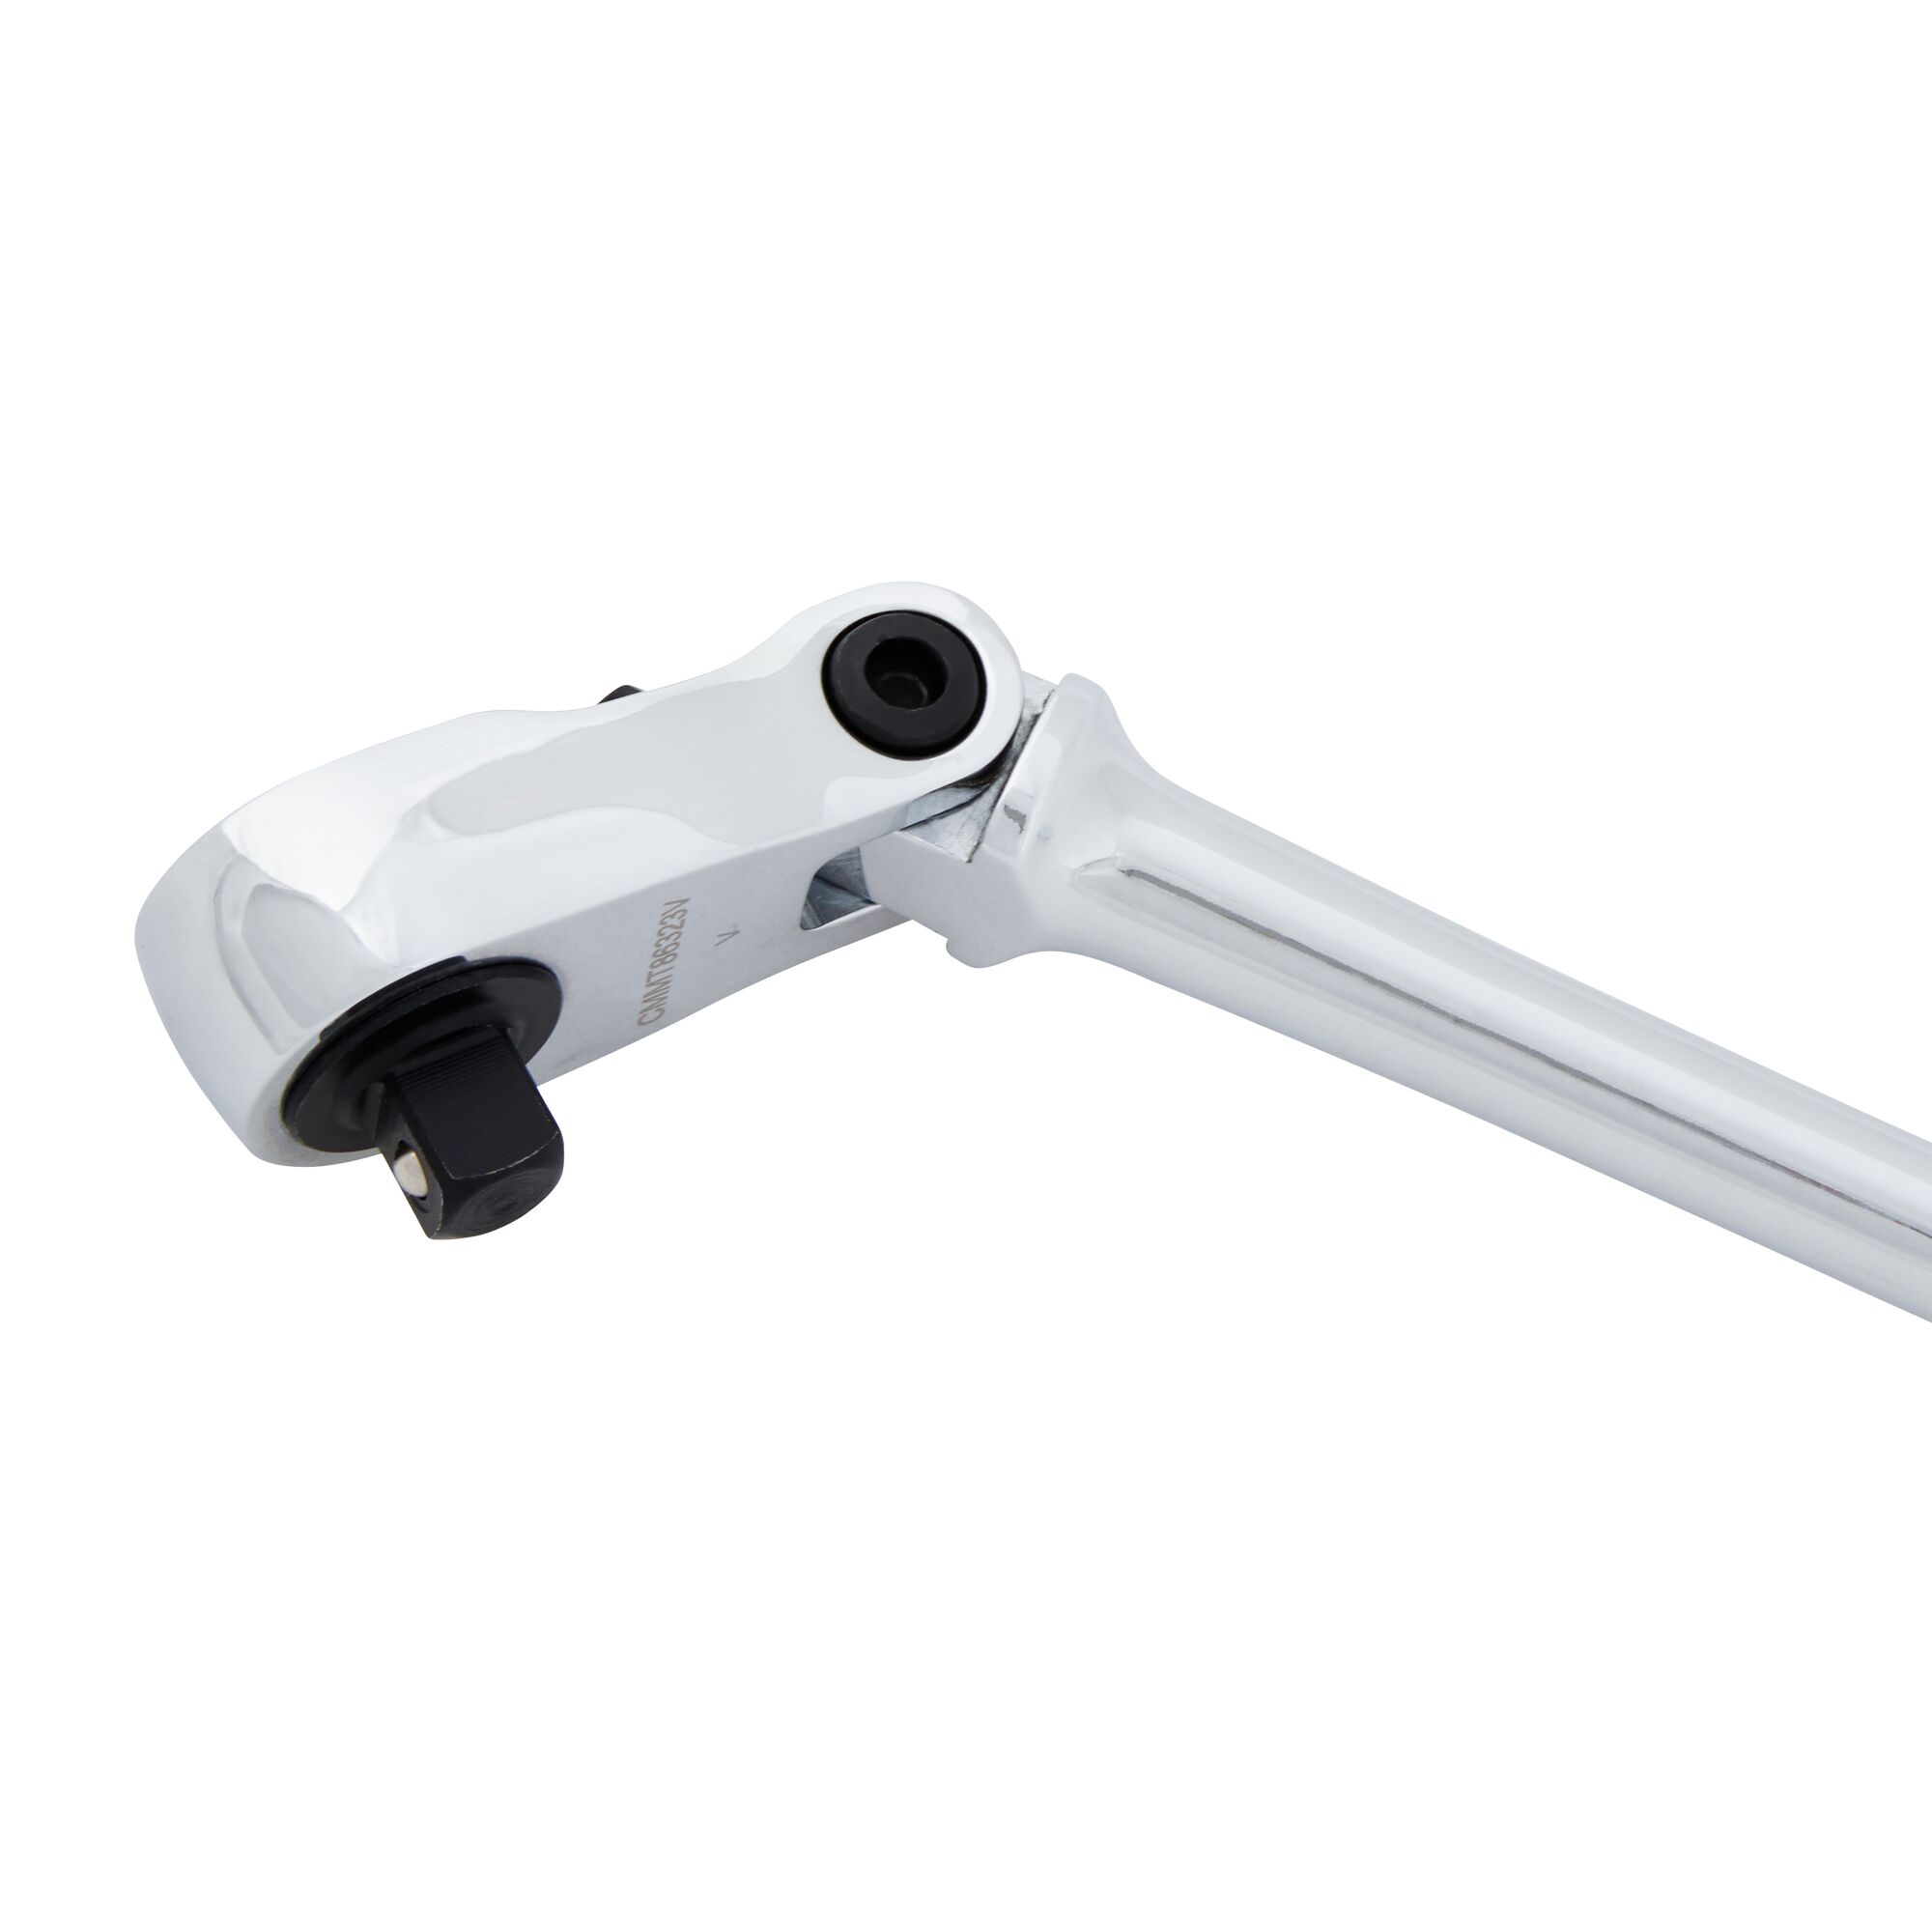 180 degrees articulating head feature in V series three eighth inch drive long flex head ratchet.